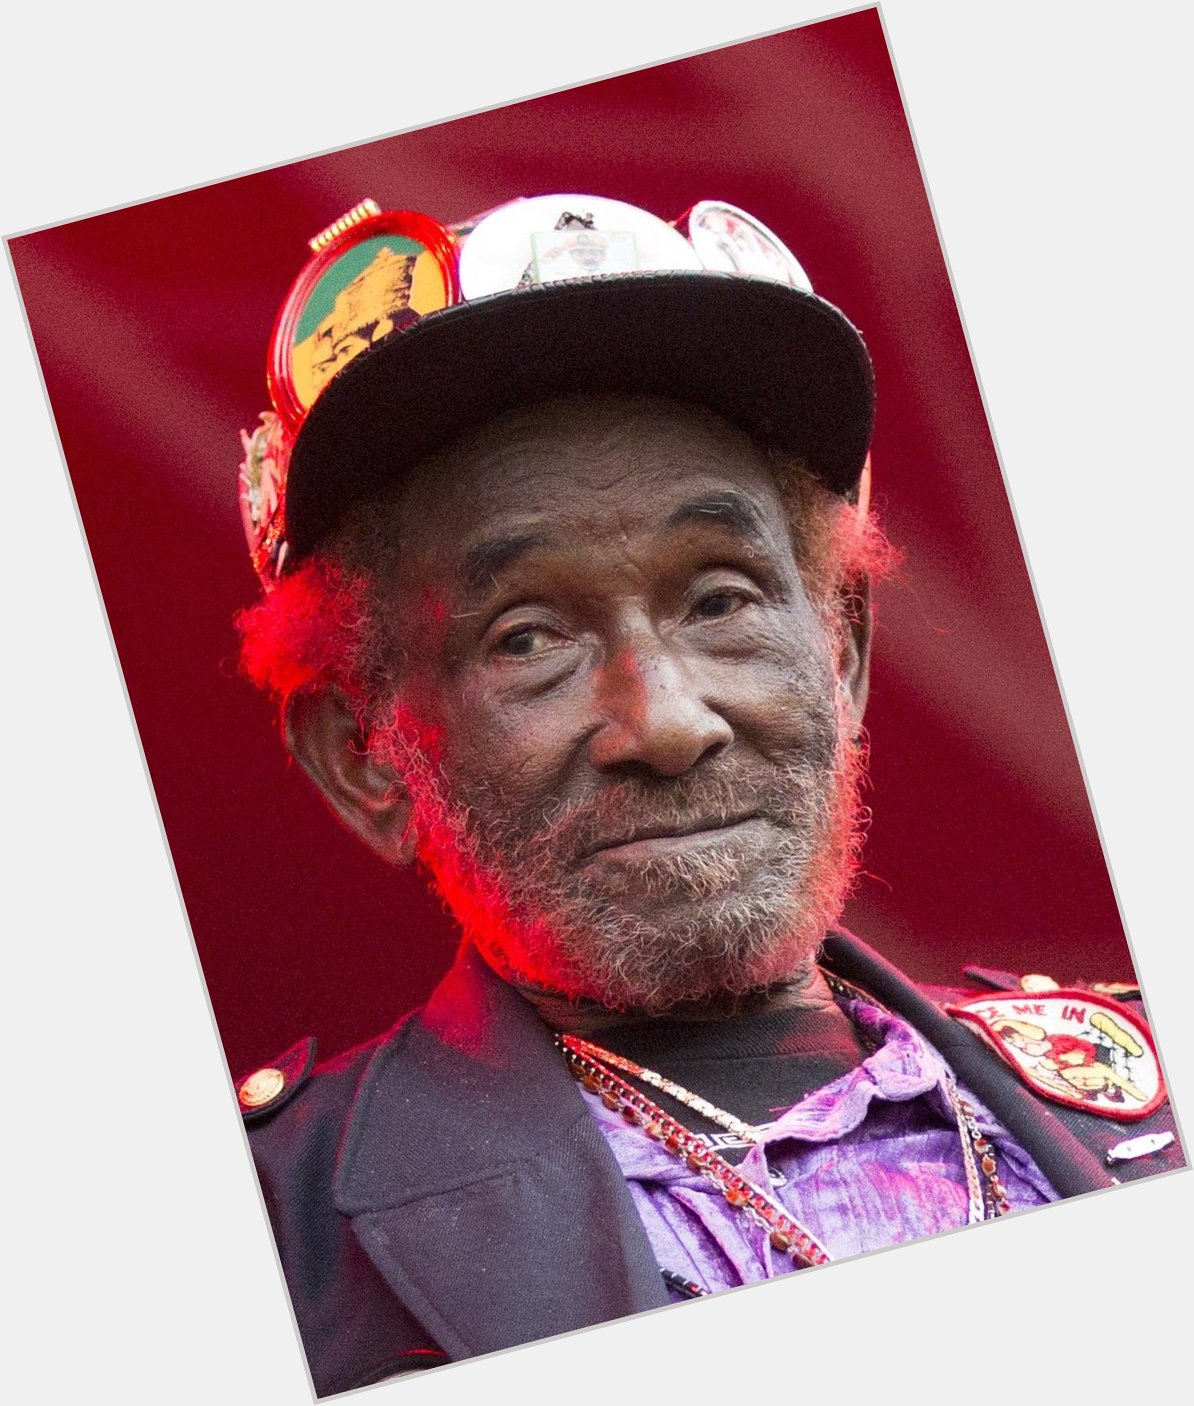 A wise man once said \"Pum pum comes, pum pum goes, that\s alright!\"

Happy Birthday Lee Scratch Perry. 